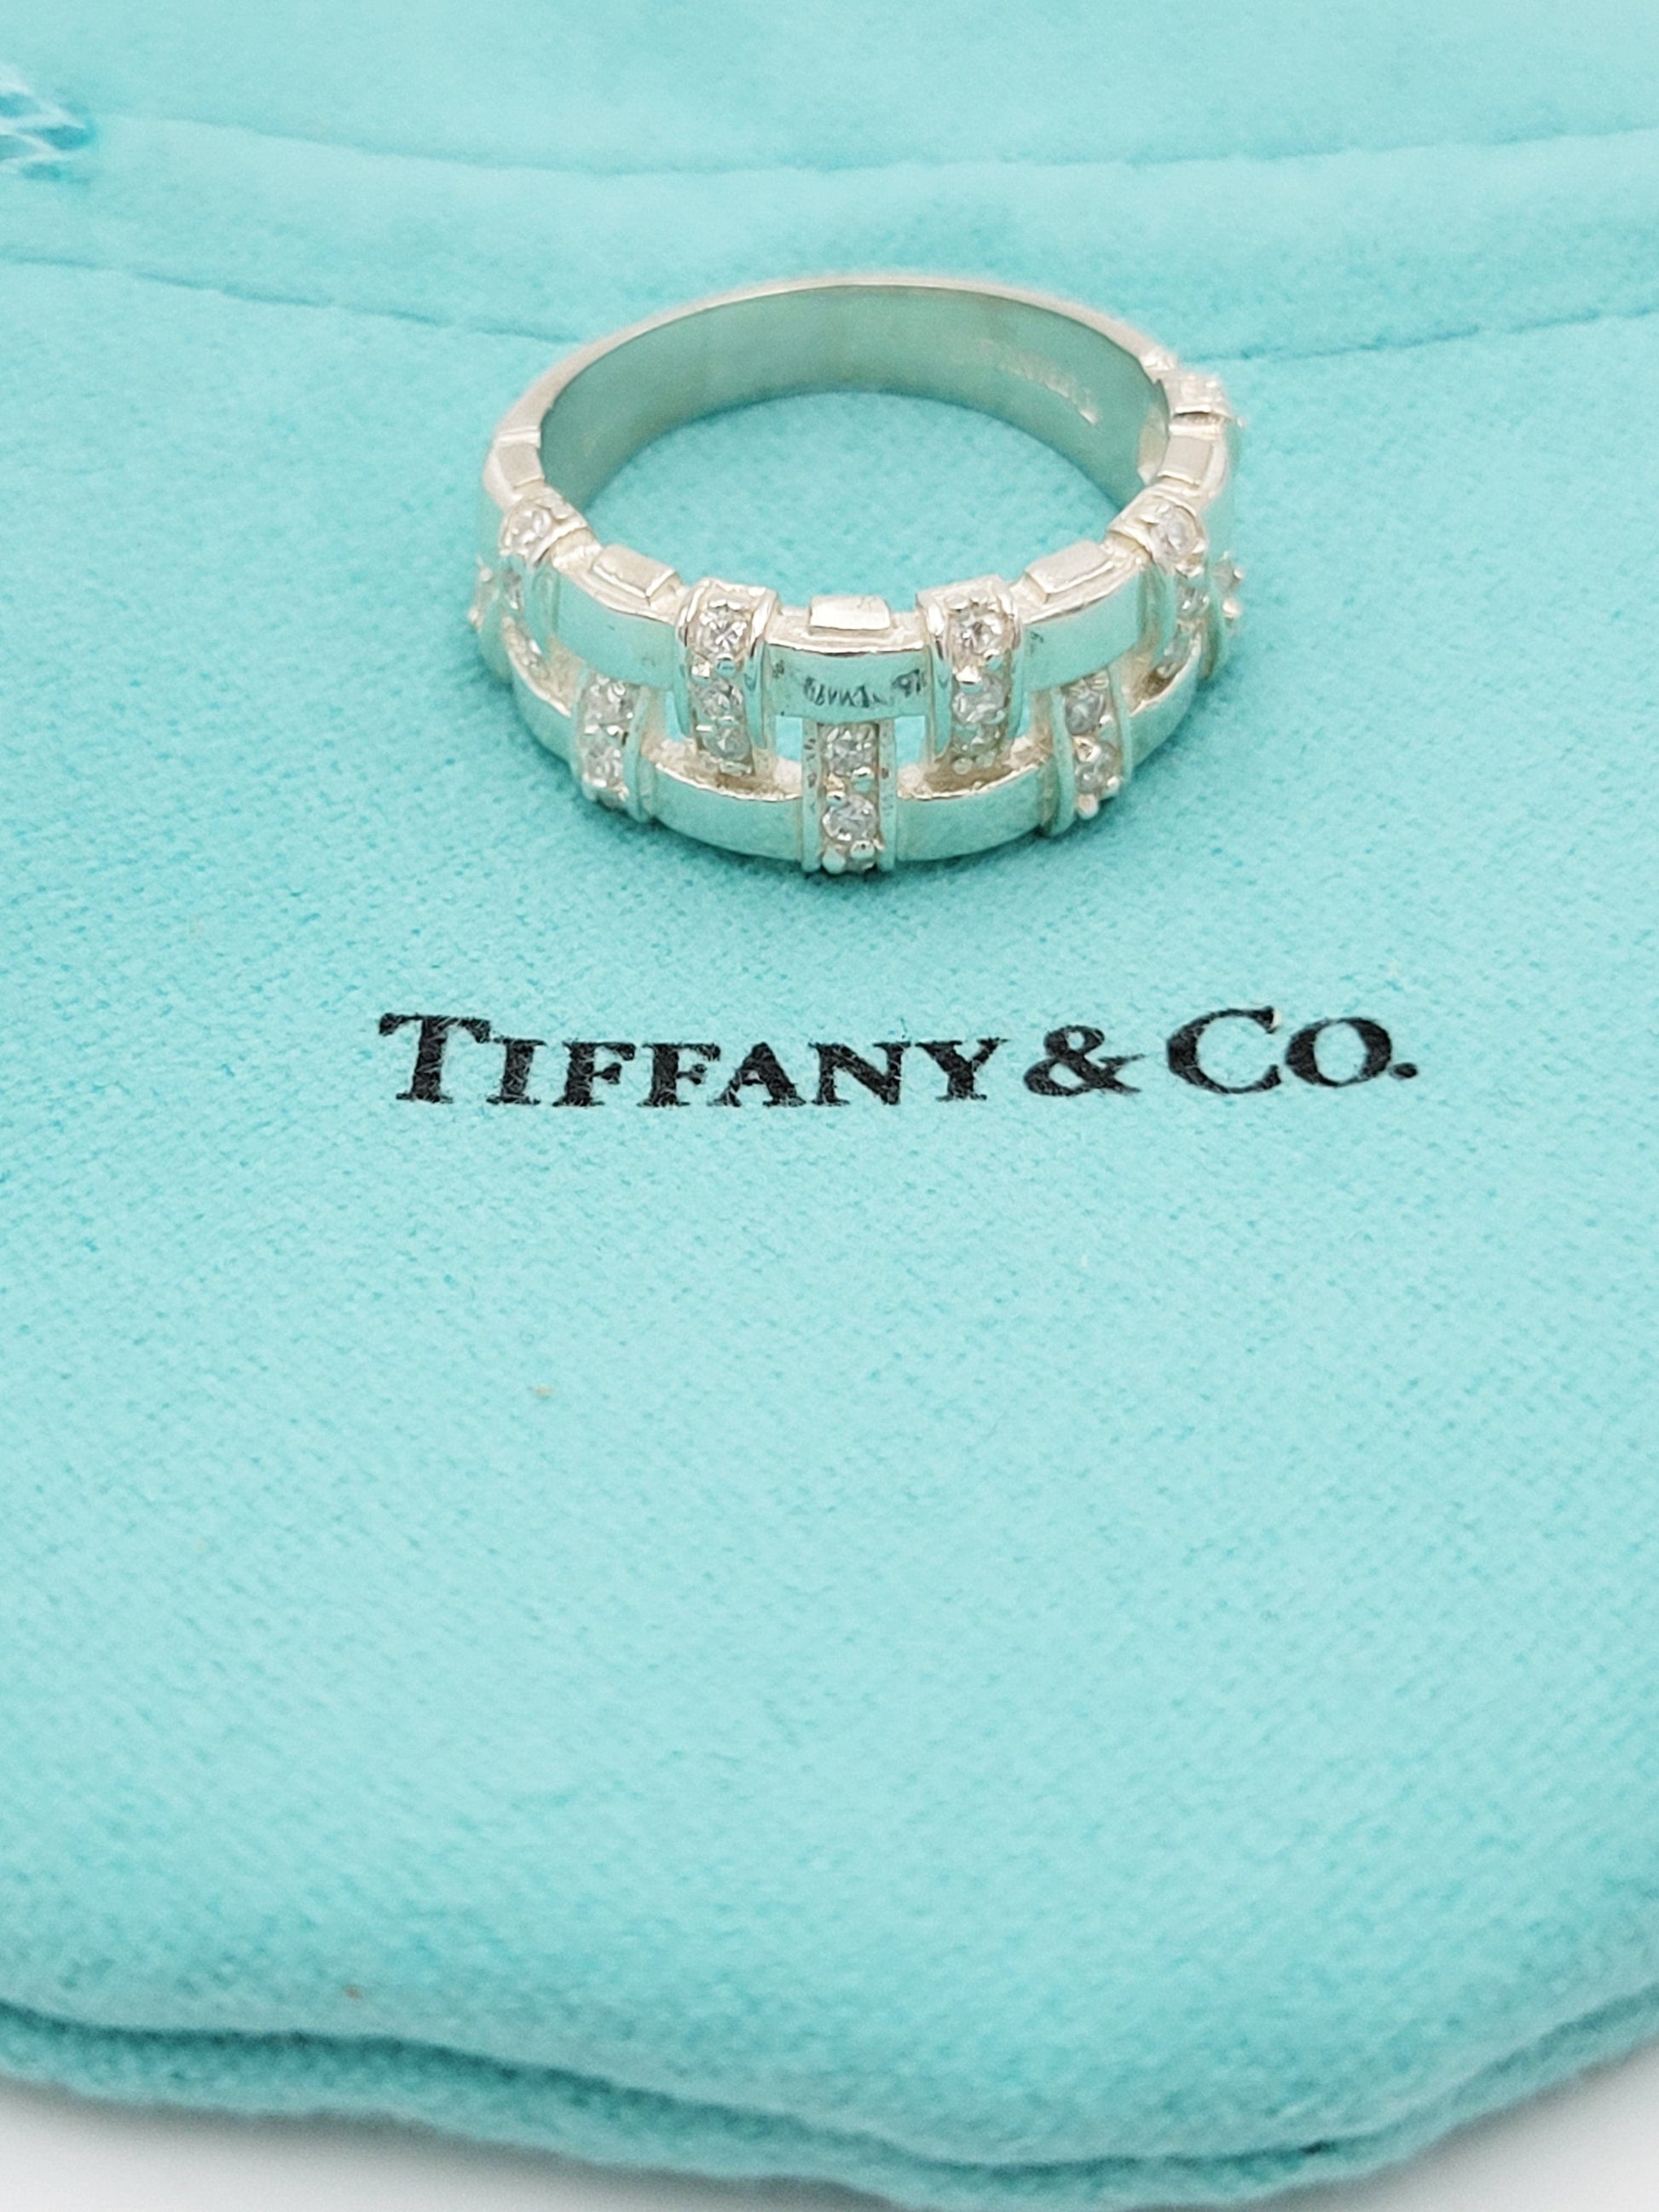 Tiffany & Co. Jewelry Authentic Sterling Silver Tiffany & Co Ring & Bag